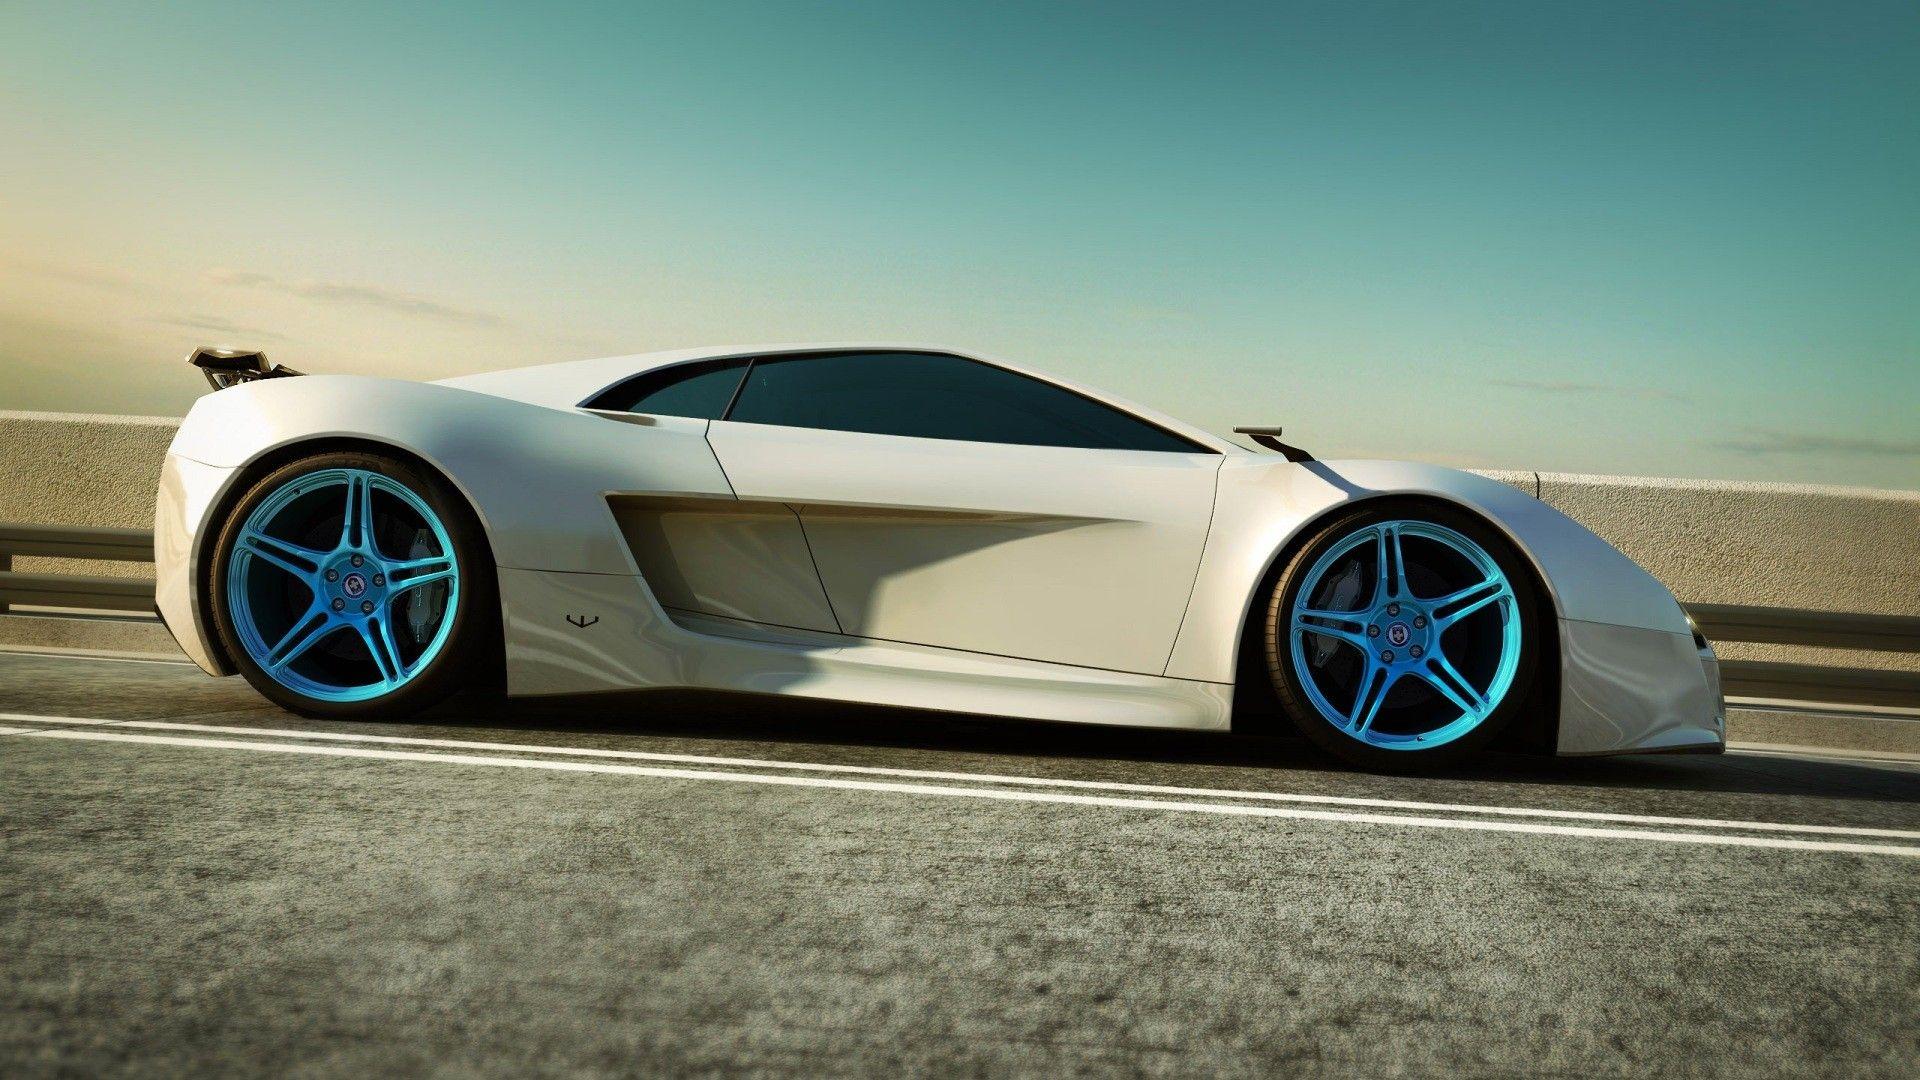 Car wallpaper HDDownload free stunning full HD background